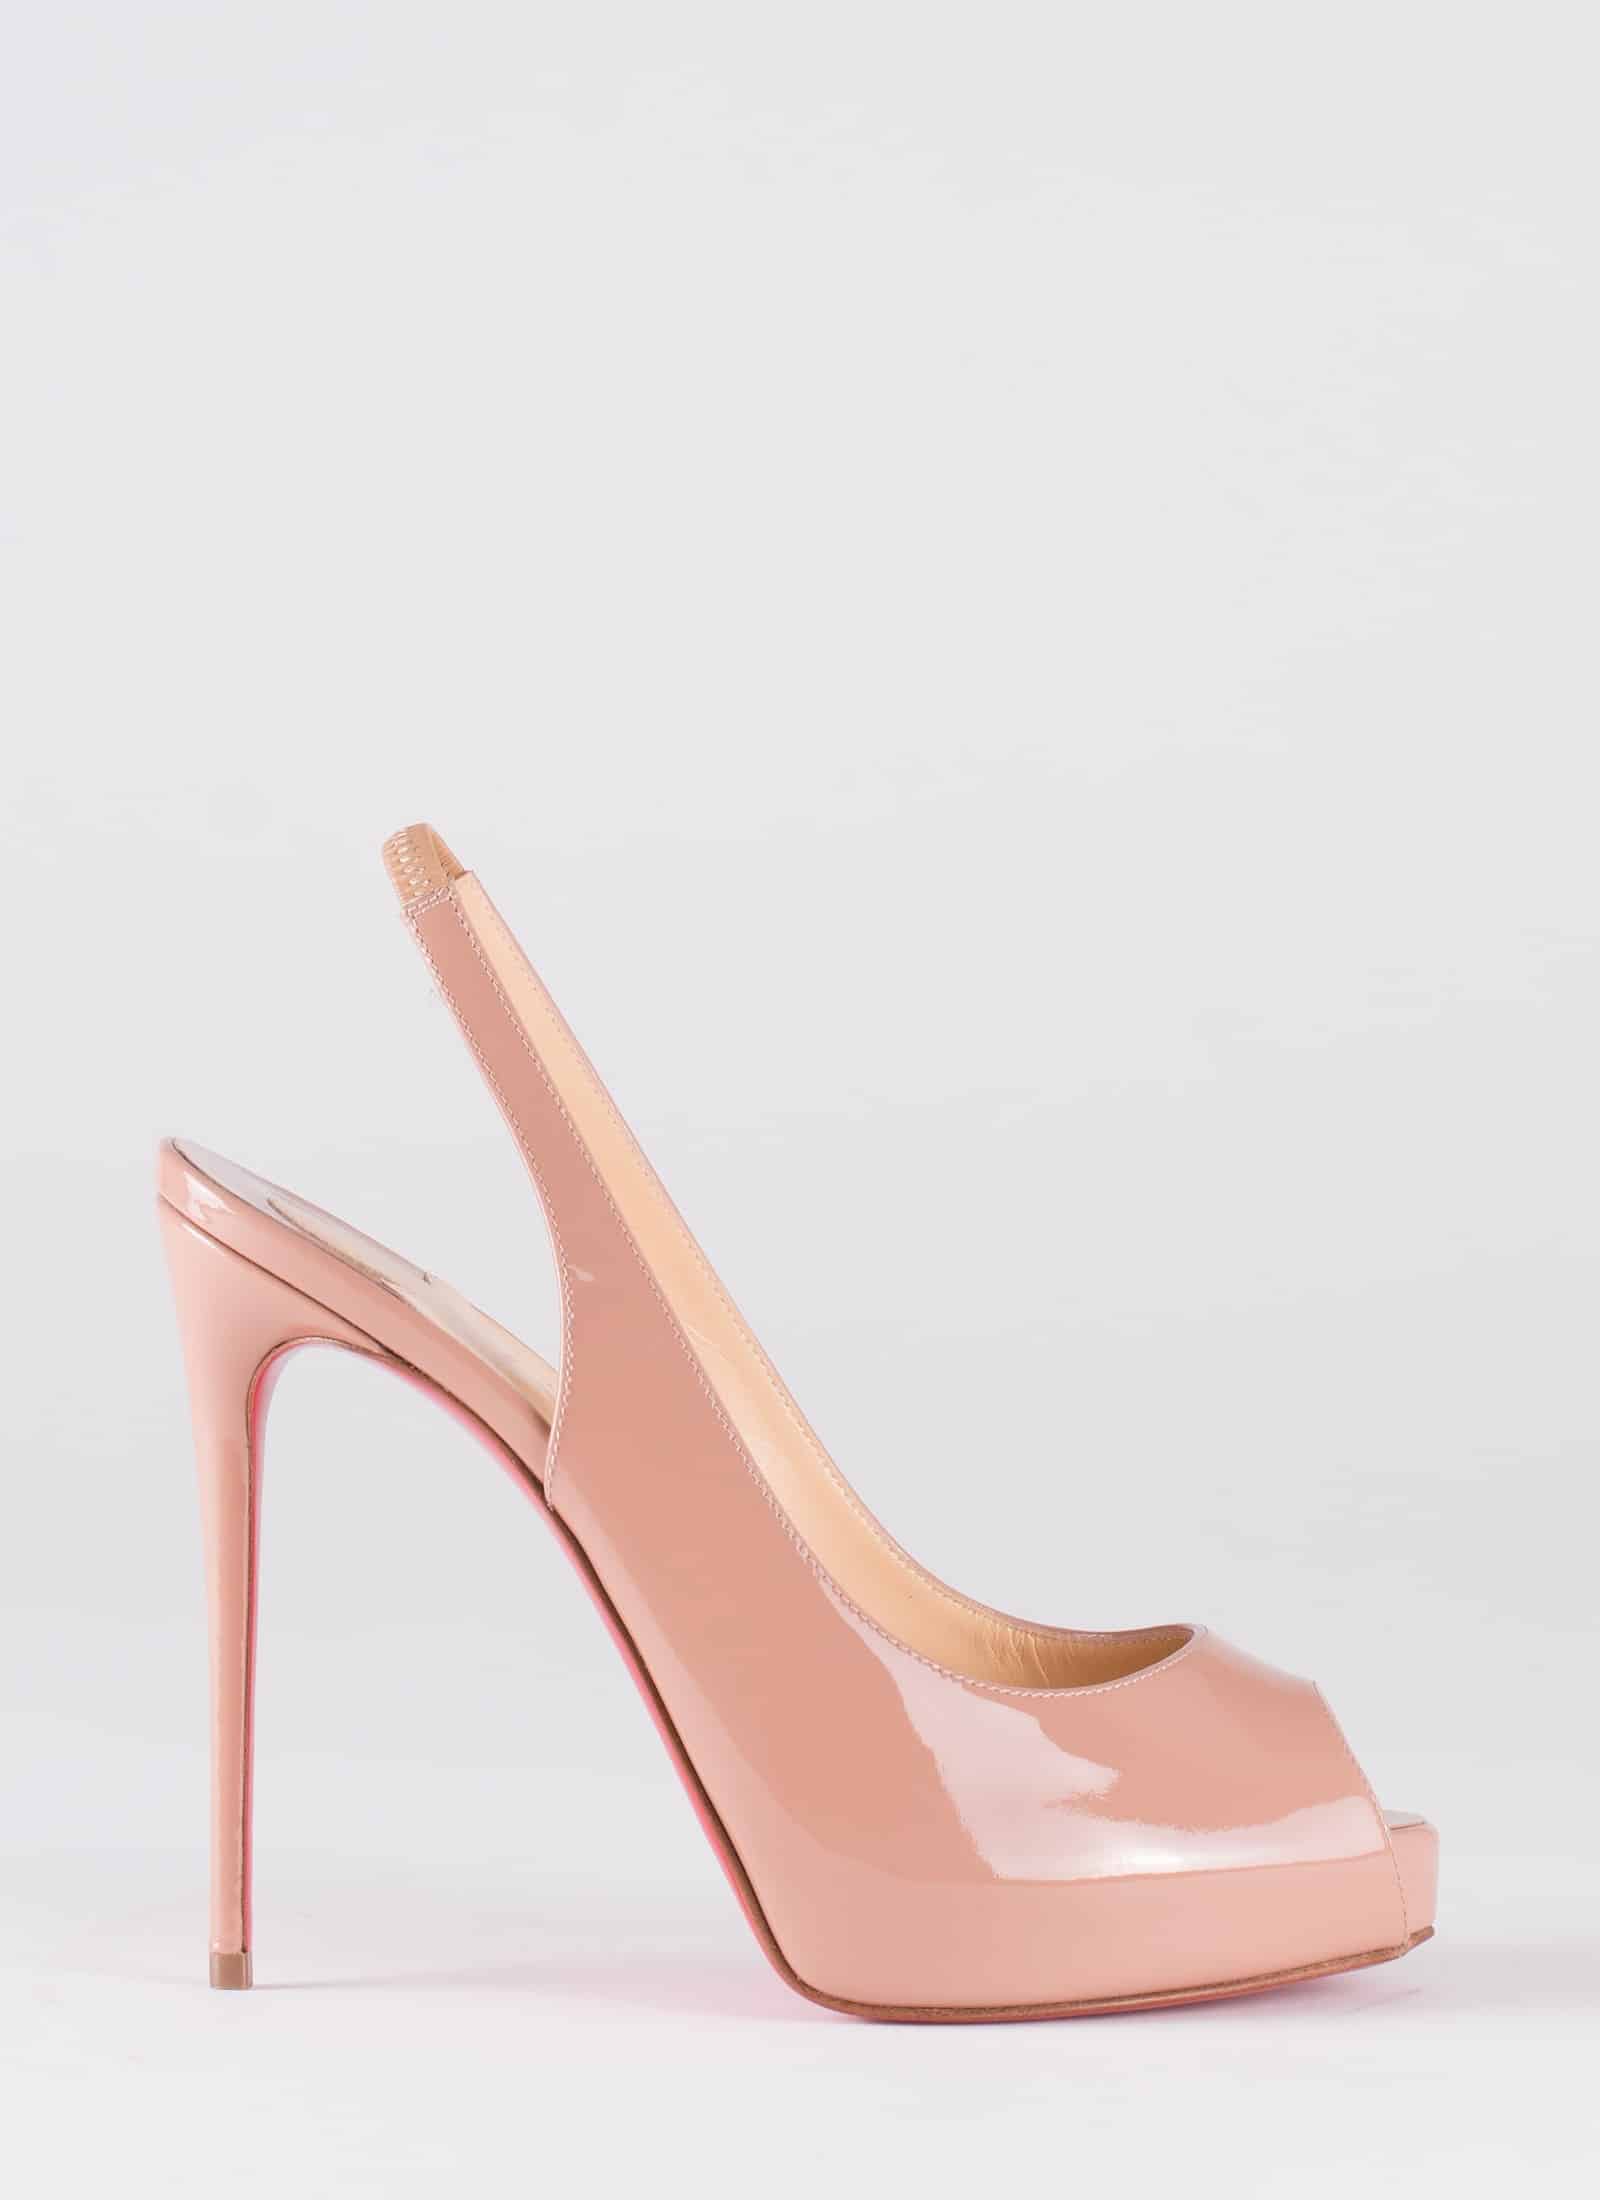 PRIVATE NUMBER PATENT LEATHER SANDALS - CHRISTIAN LOUBOUTIN